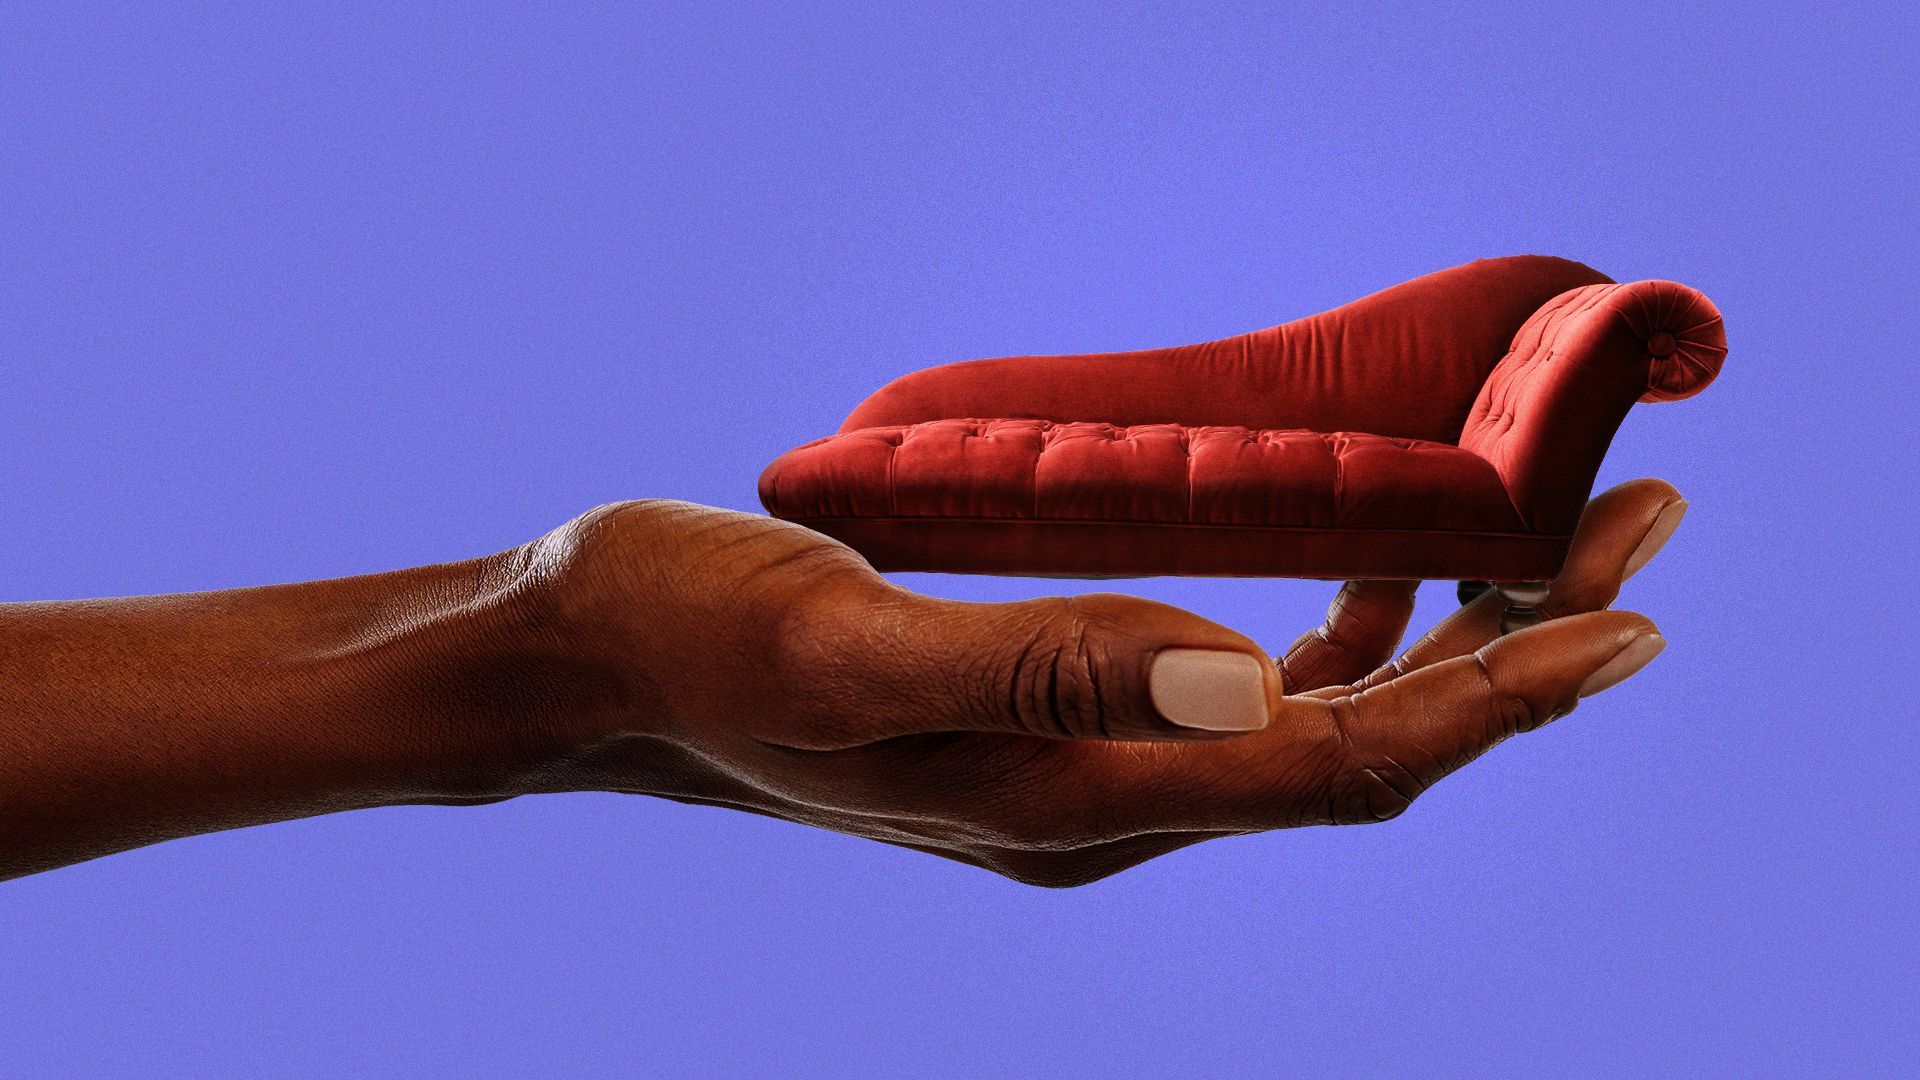 Illustration of a Black woman's hand holding a therapy sofa.